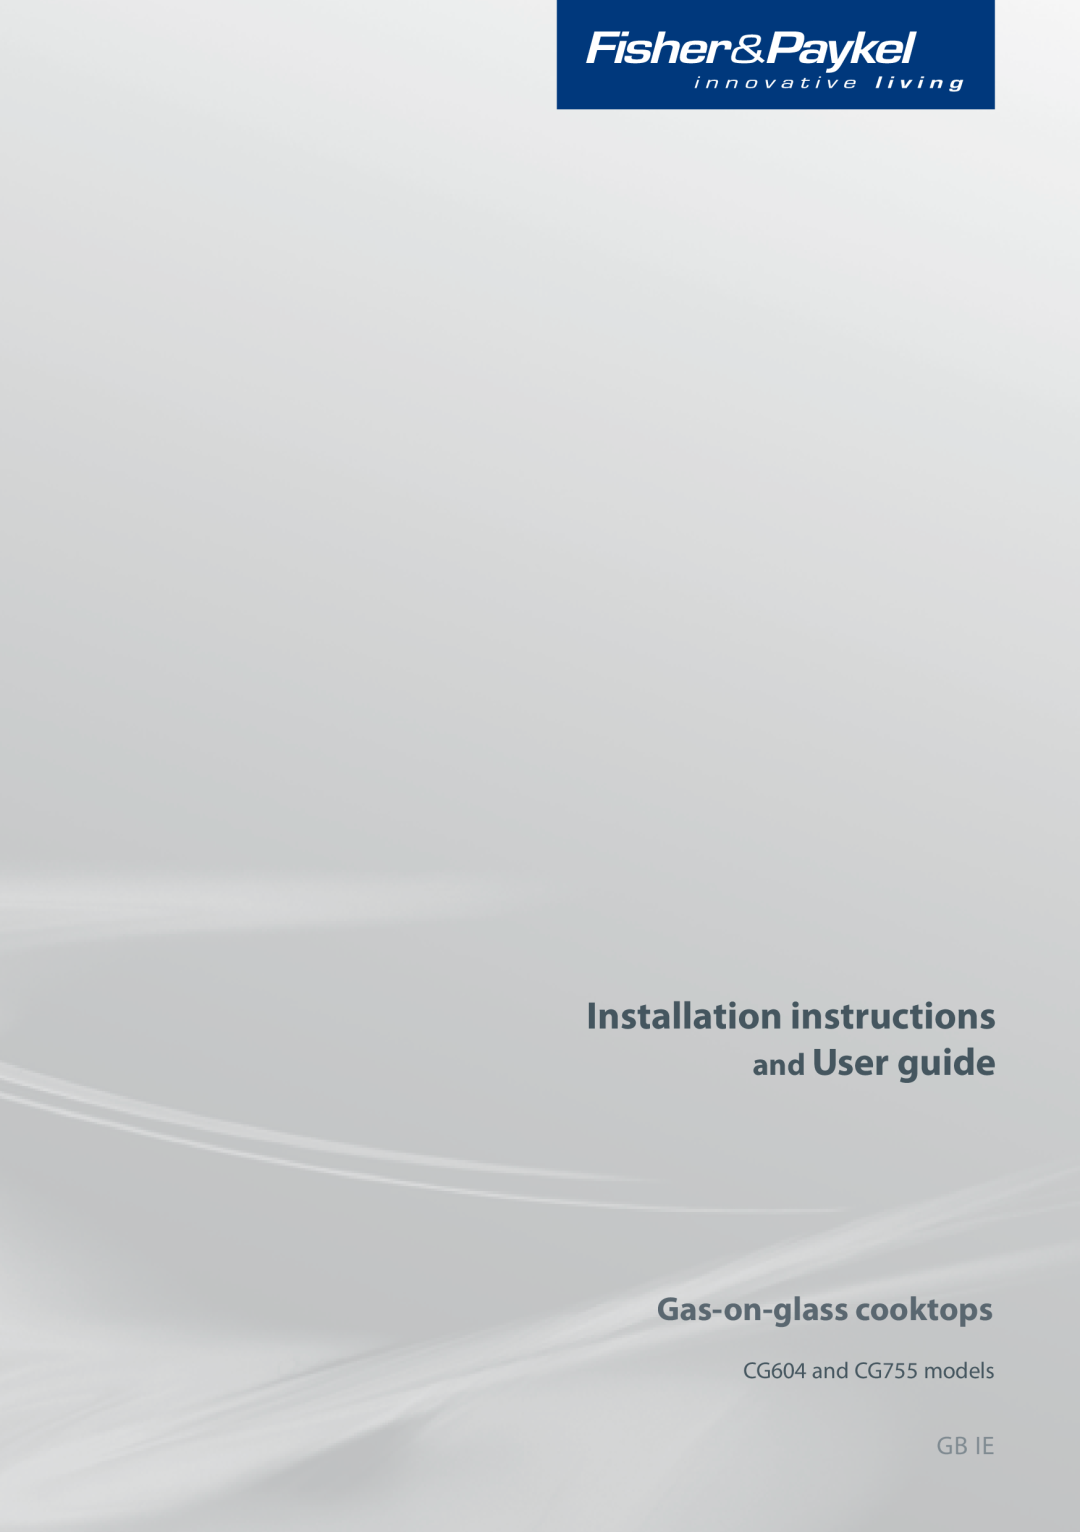 Fisher & Paykel CG755 installation instructions Installation instructions and User guide, Gas-on-glass cooktops, Gb Ie 